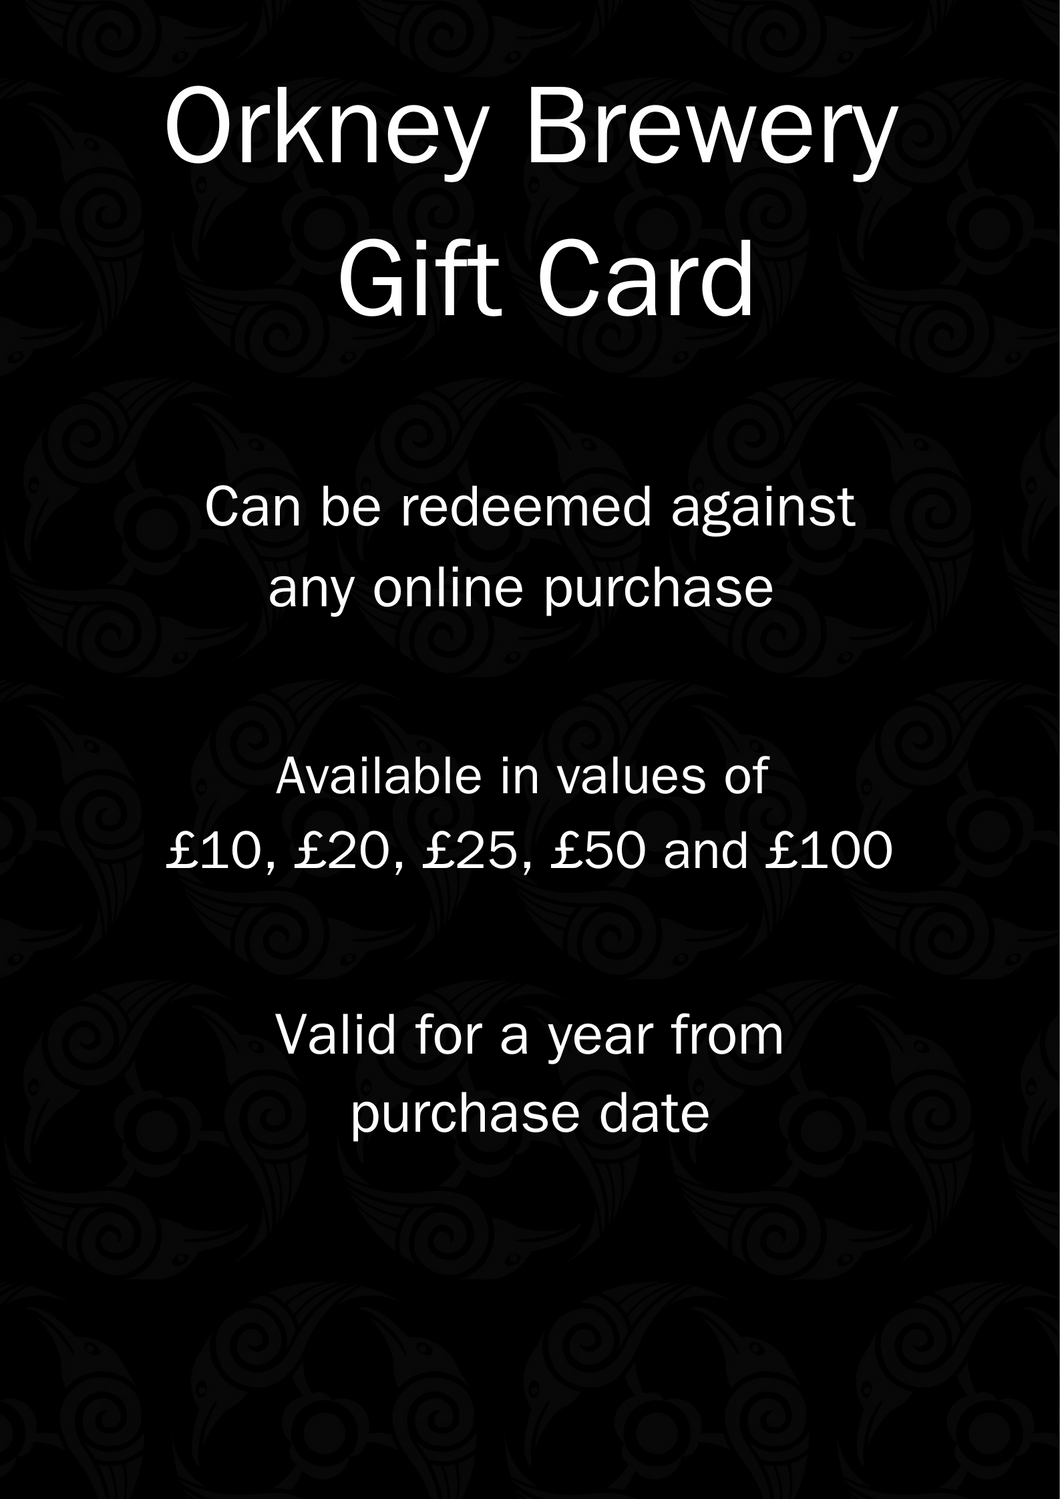 Orkney Brewery Gift Card